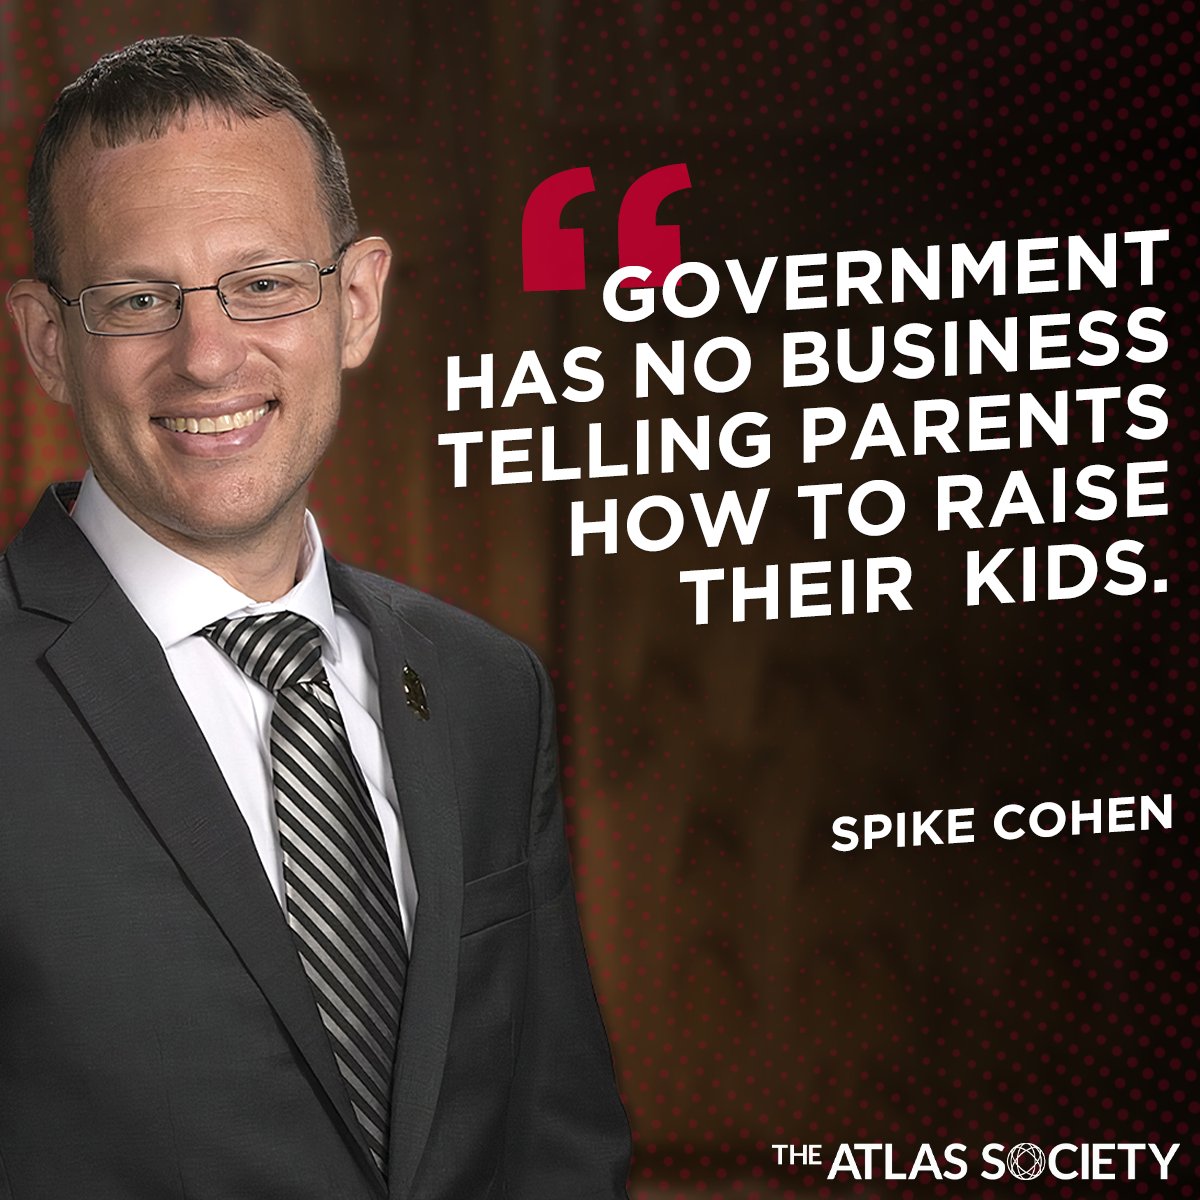 Right! Great Quote By Spike Cohen! #AynRand #SpikeCohen @RealSpikeCohen